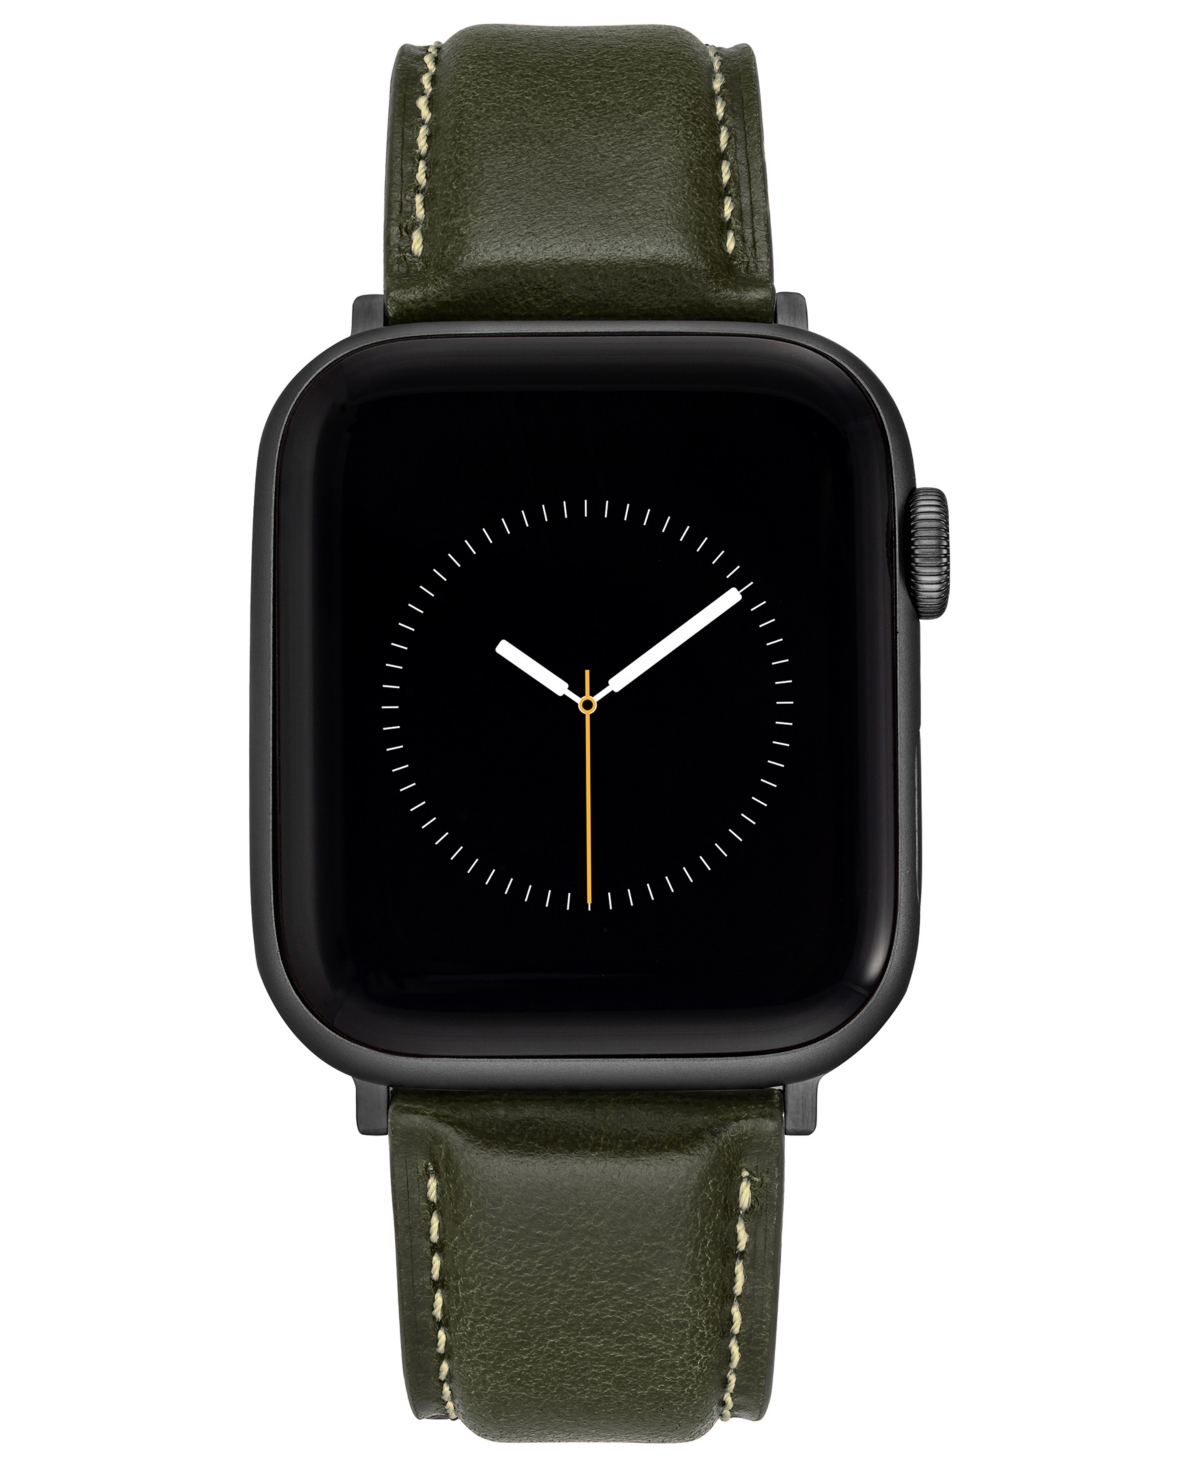 Withit Dark Green Smooth Leather Strap With Contrast Stitching And Gunmetal Gray Stainless Steel Lug